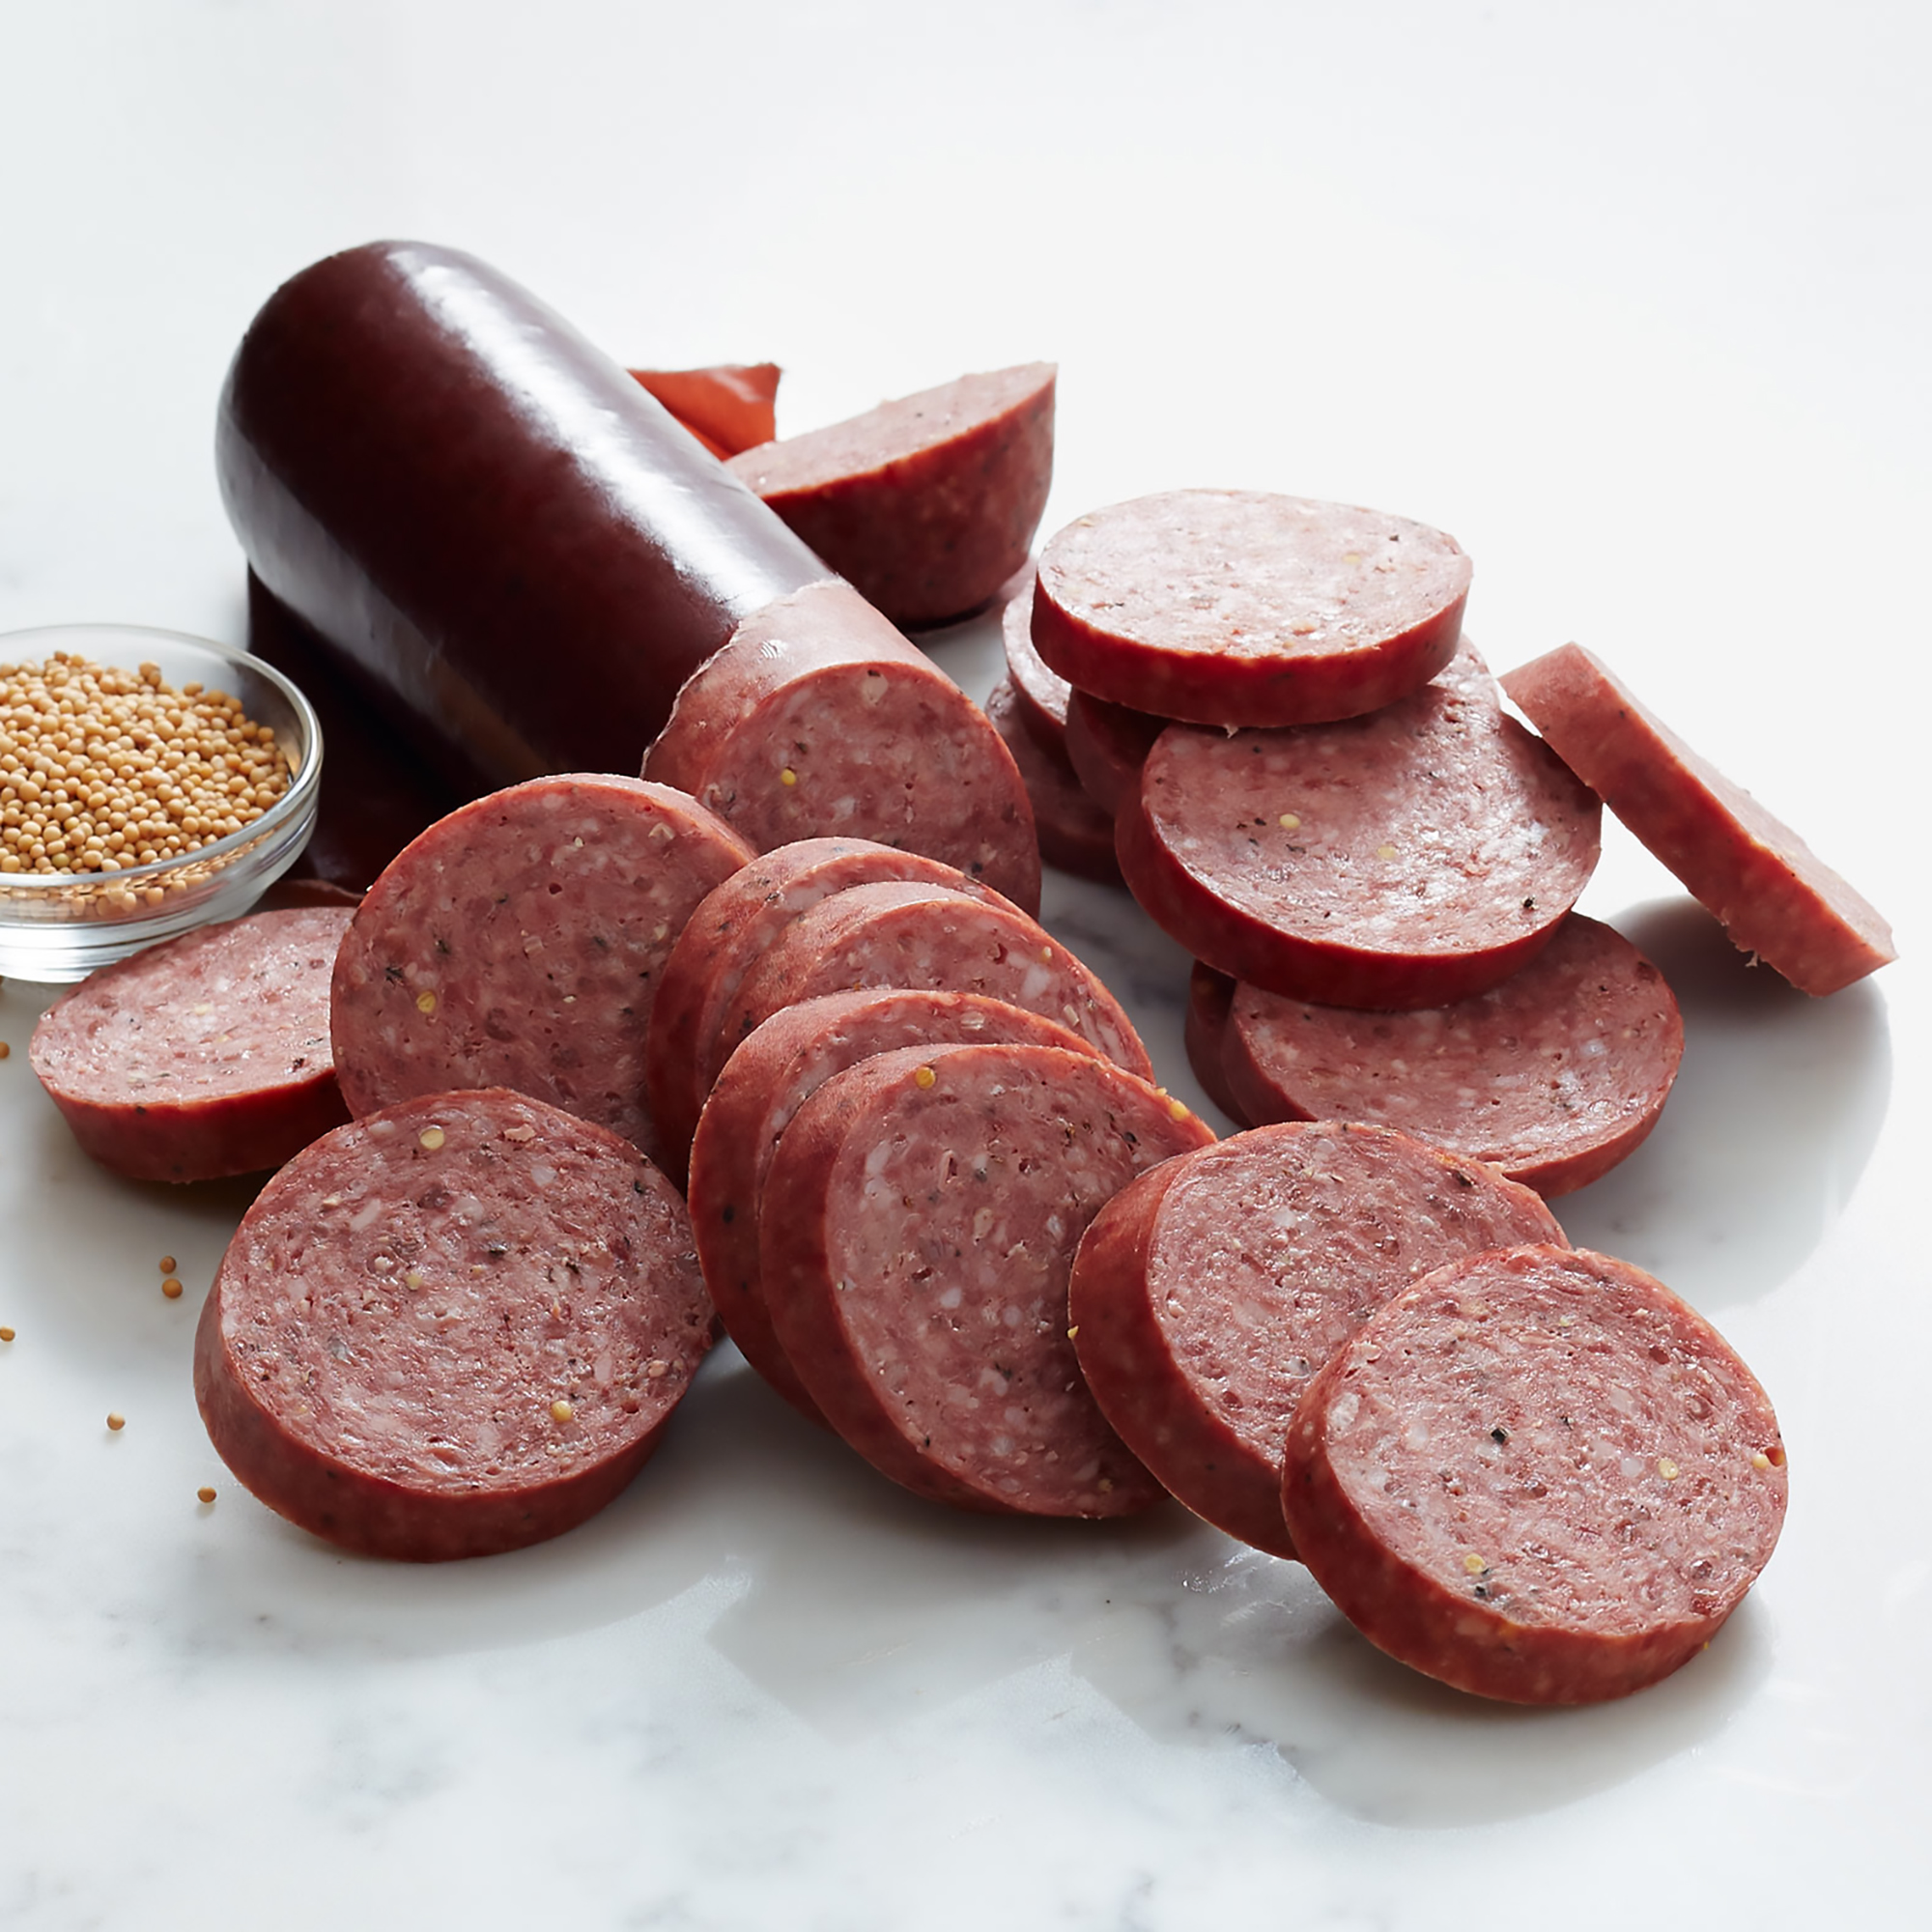 https://www.hickoryfarms.com/on/demandware.static/-/Sites-Web-Master-Catalog/default/dw887b5541/images/products/our-signature-beef-summer-sausage-000211-1.jpg